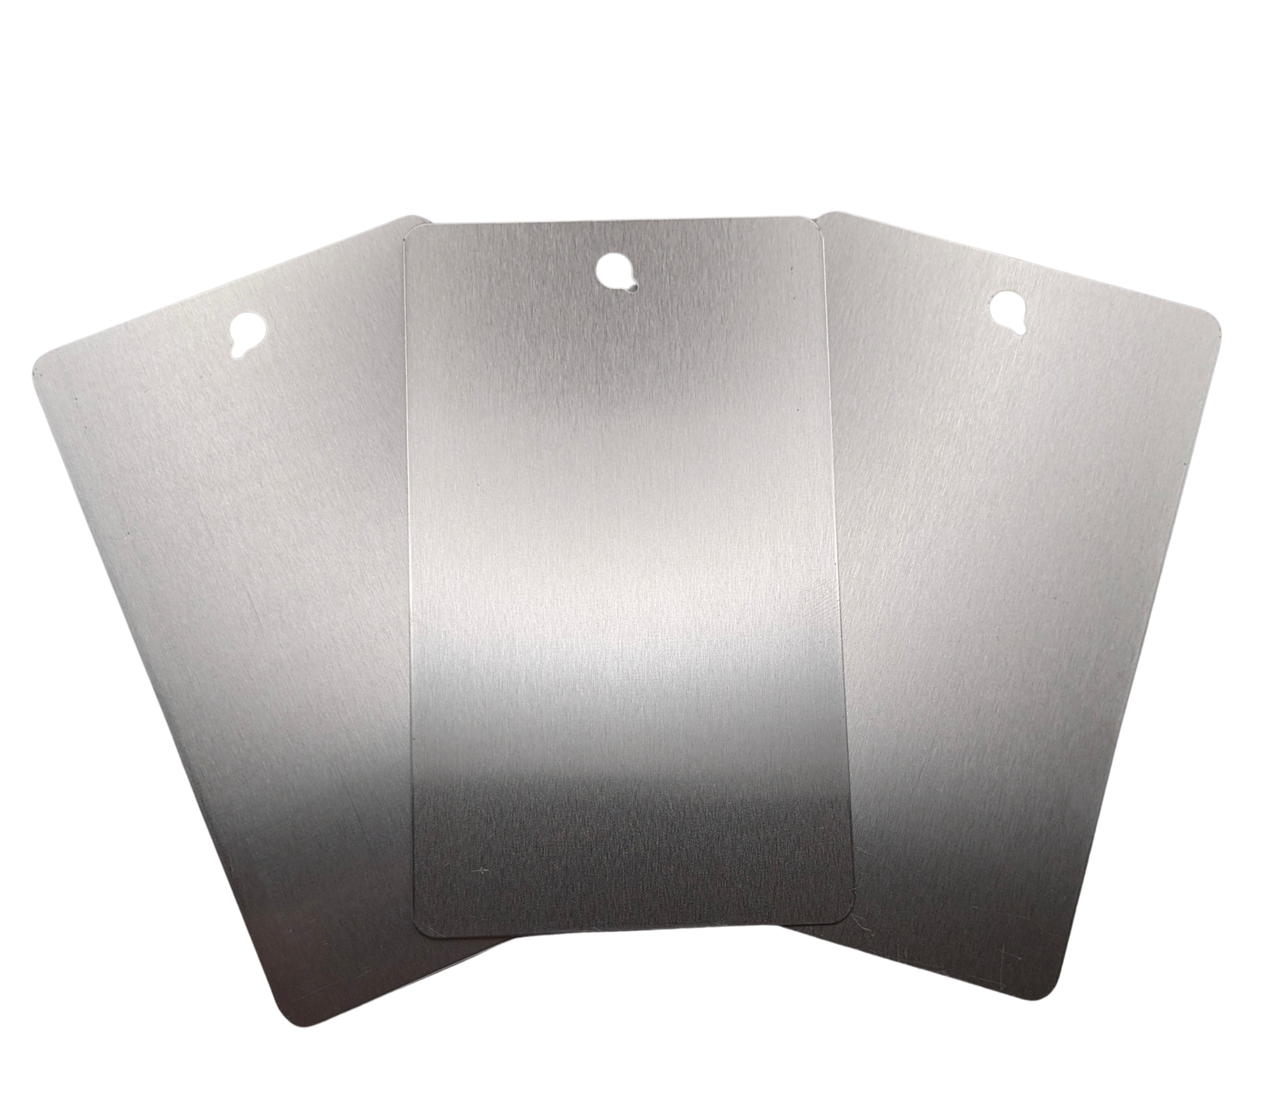 3 inch by 5 inch blank aluminum panels for powder coating